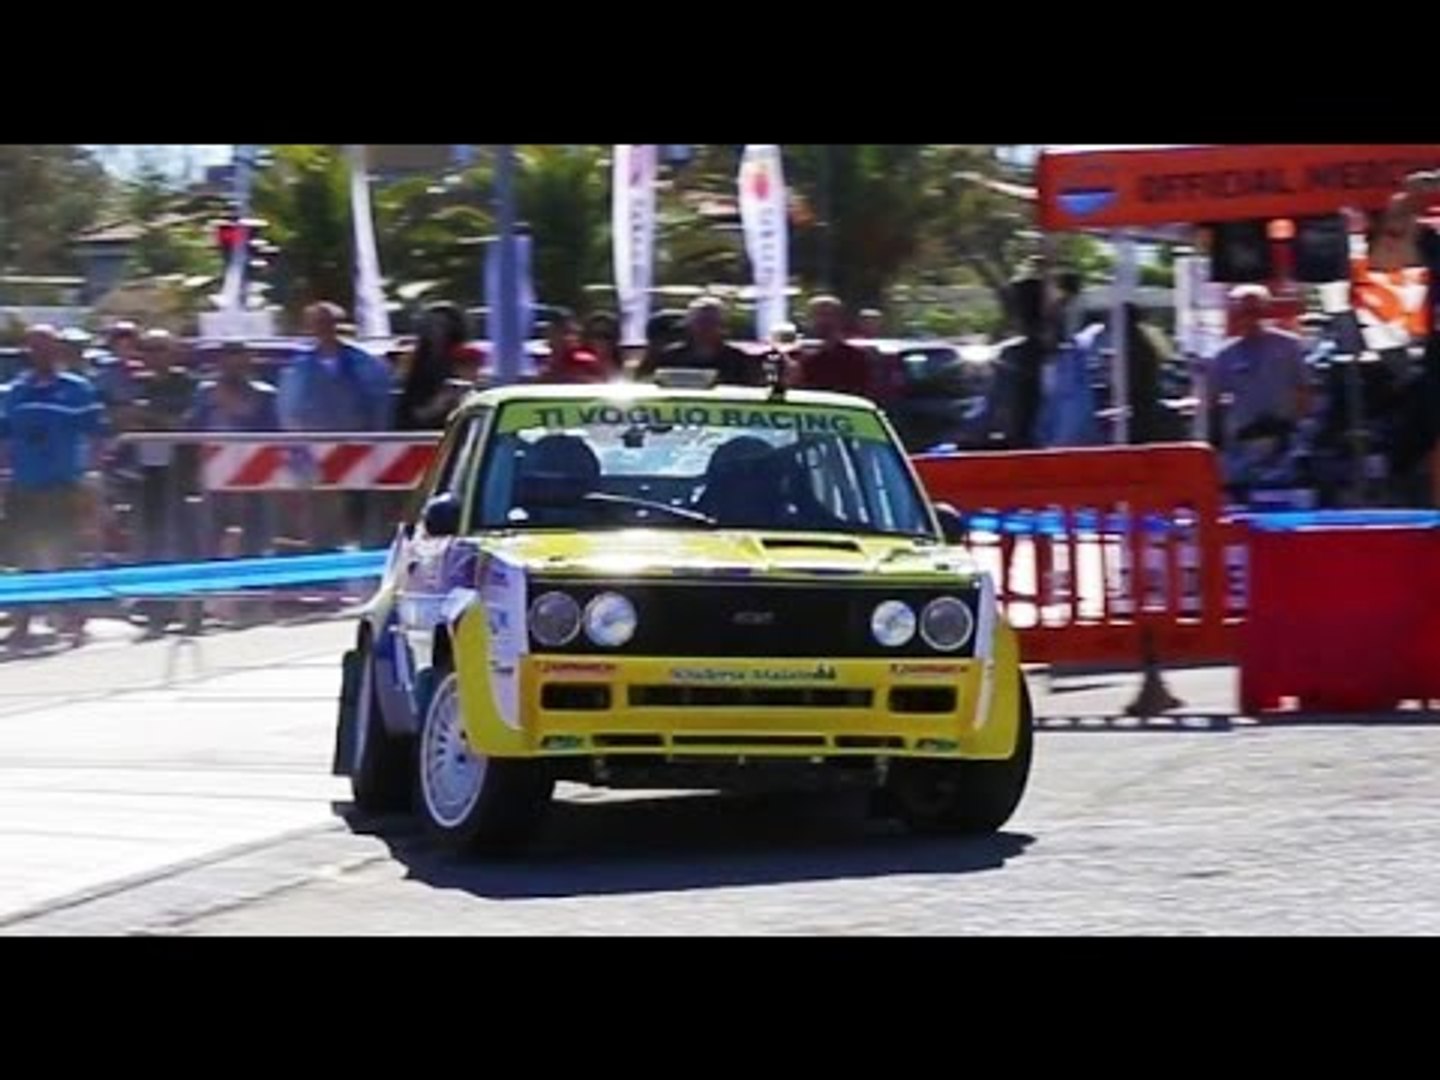 Fiat 131 Racing (Paolo Diana at IHCC) - Davide Cironi drive experience -  Video Dailymotion